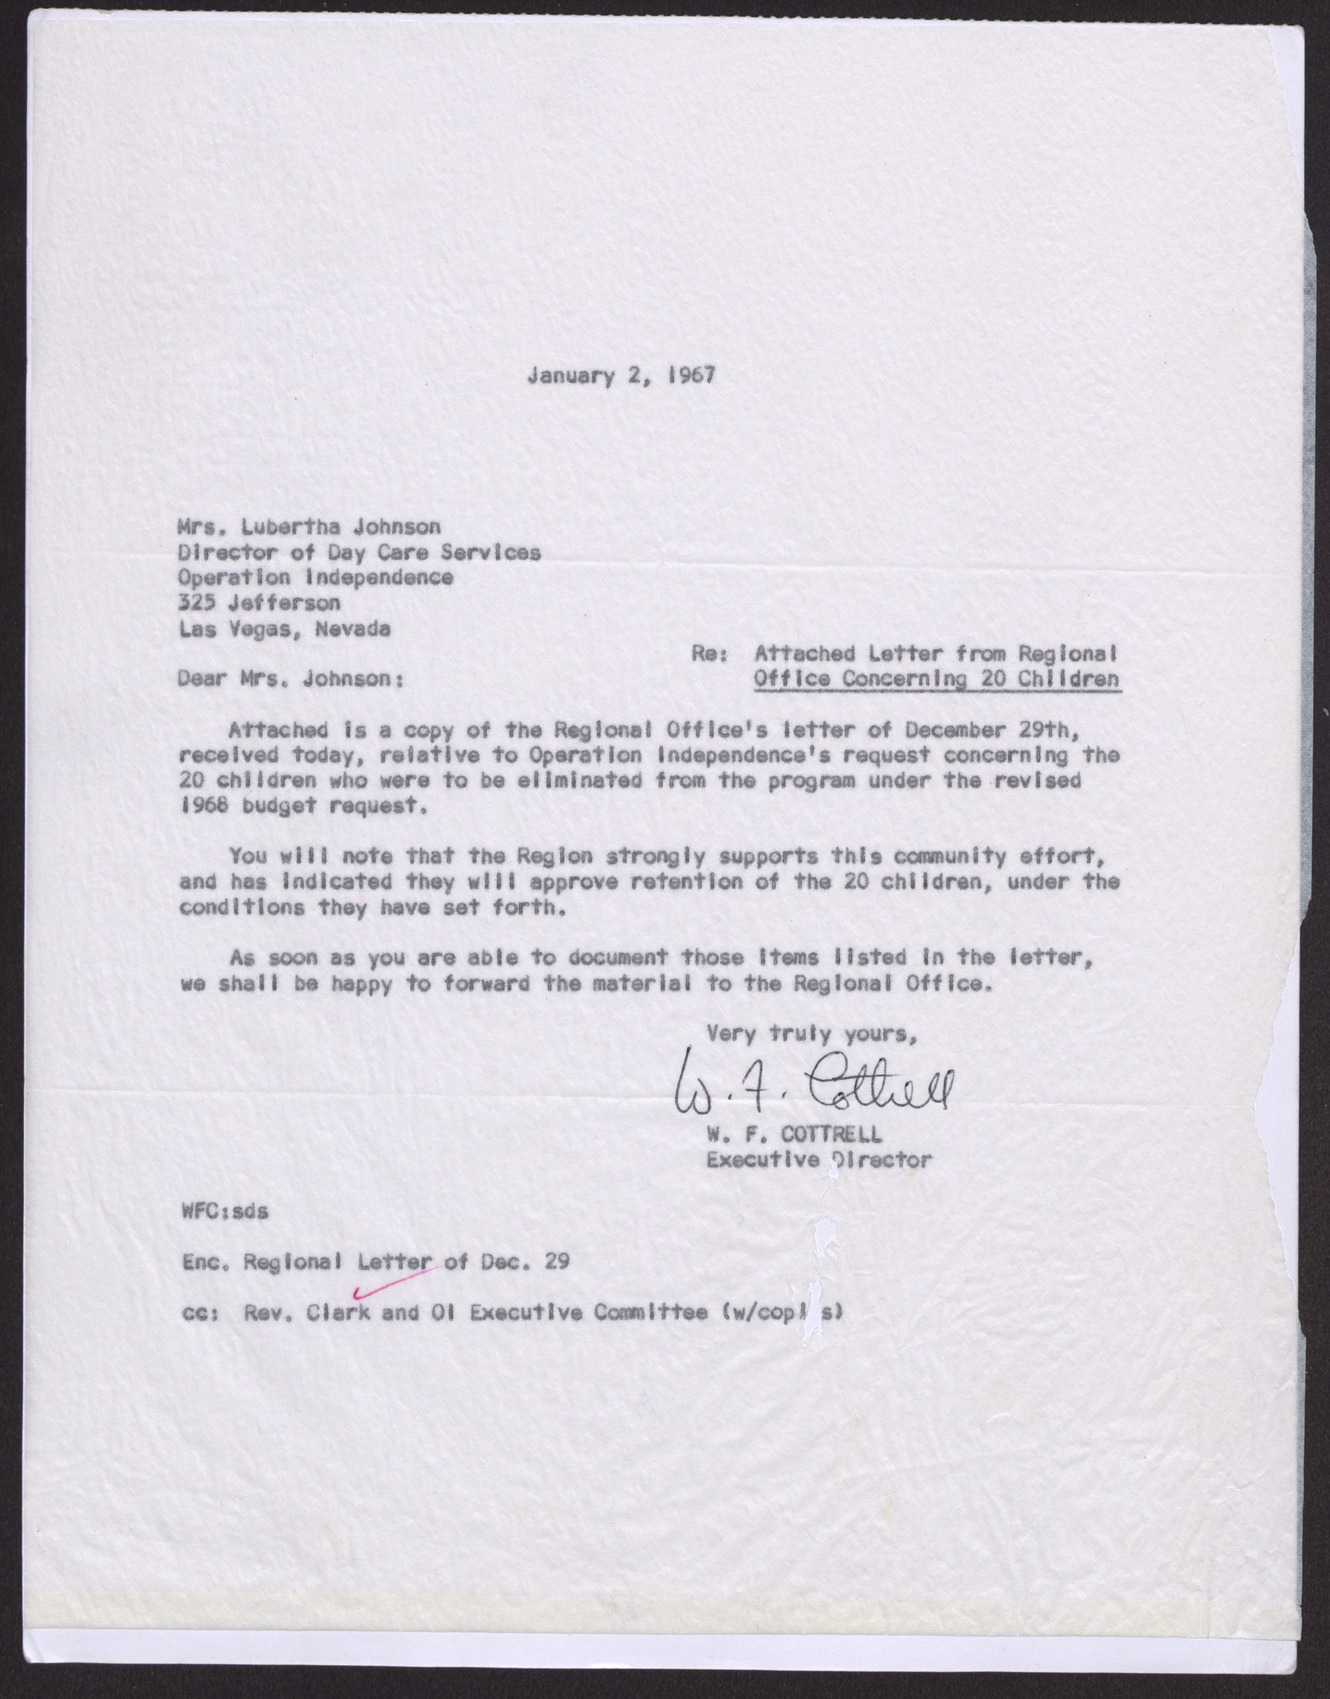 Letter to Mrs. Lubertha Johnson from W. F. Cottrell, January 2, 1967